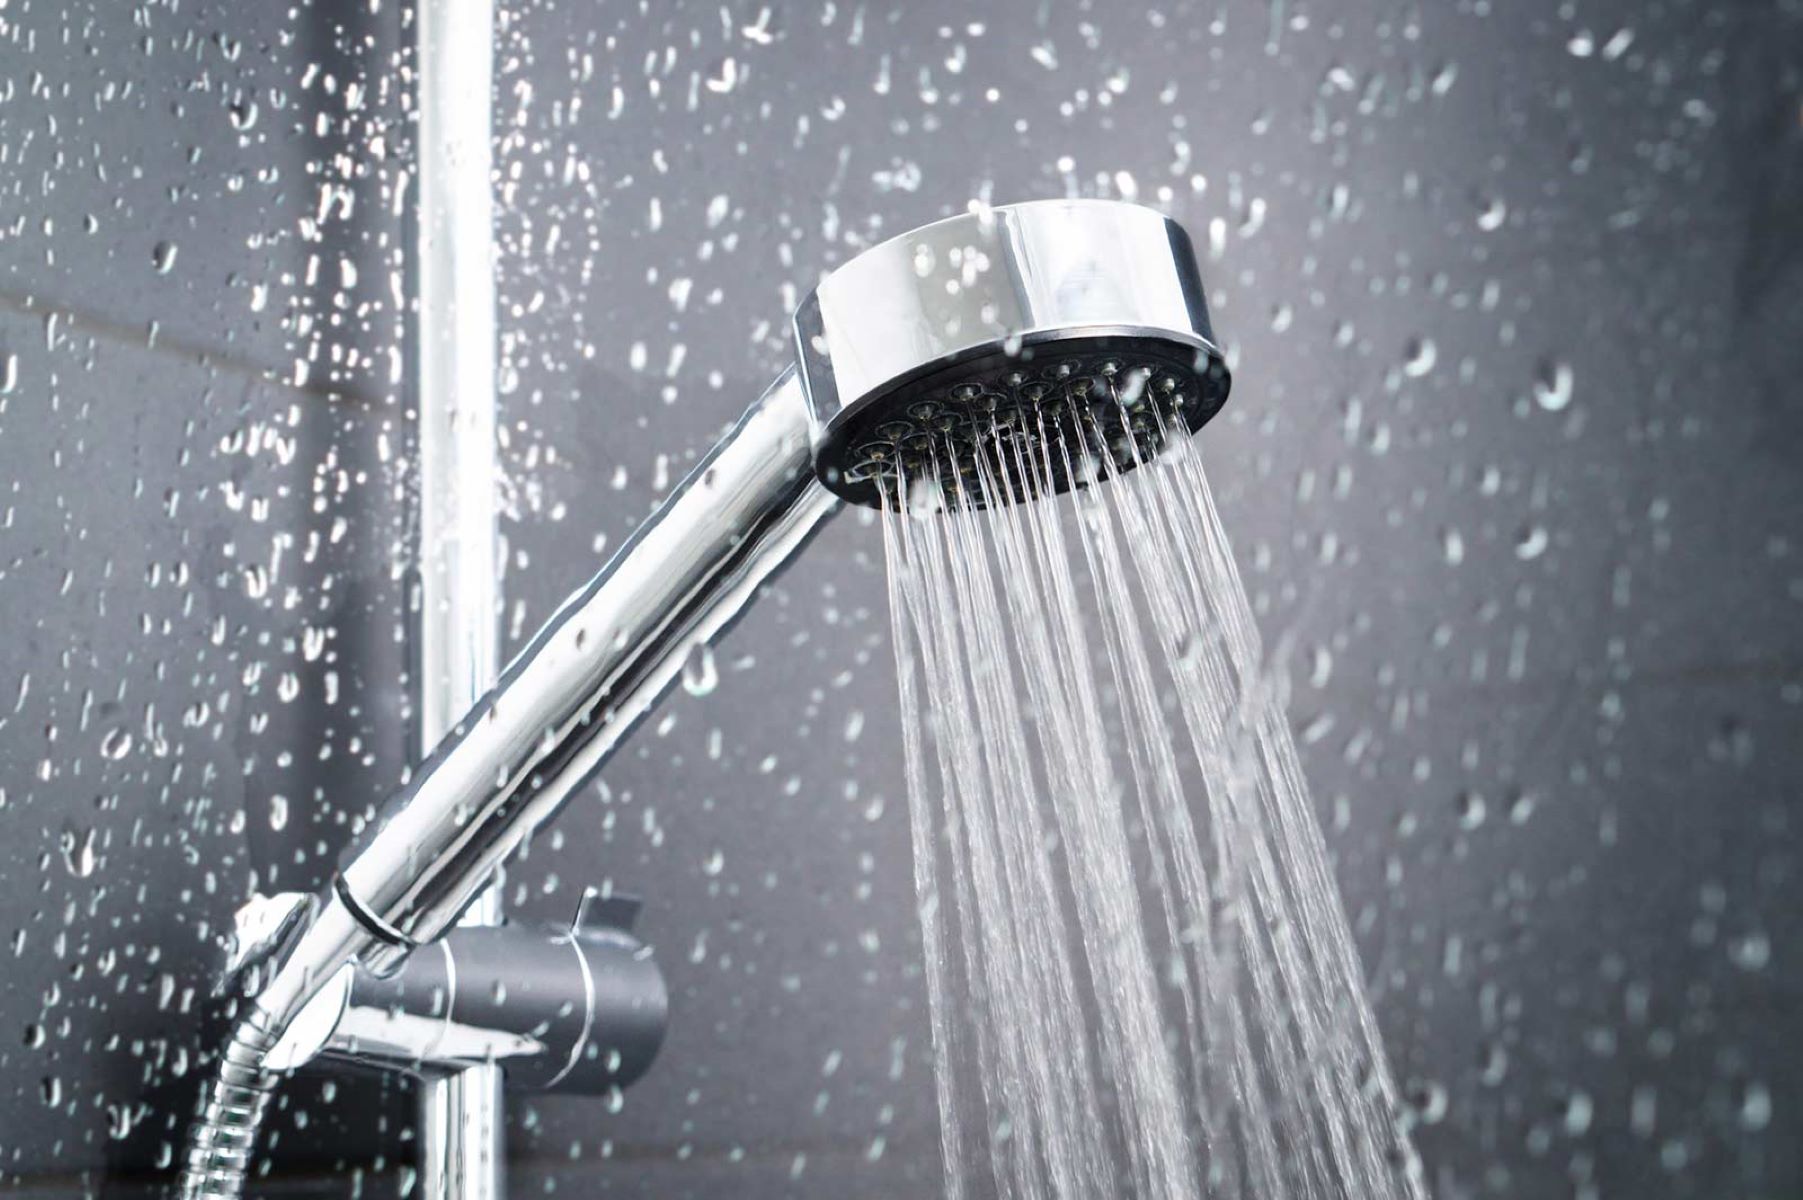 Benefits Of Taking Cold Showers: 9 Reasons To Embrace The Chill